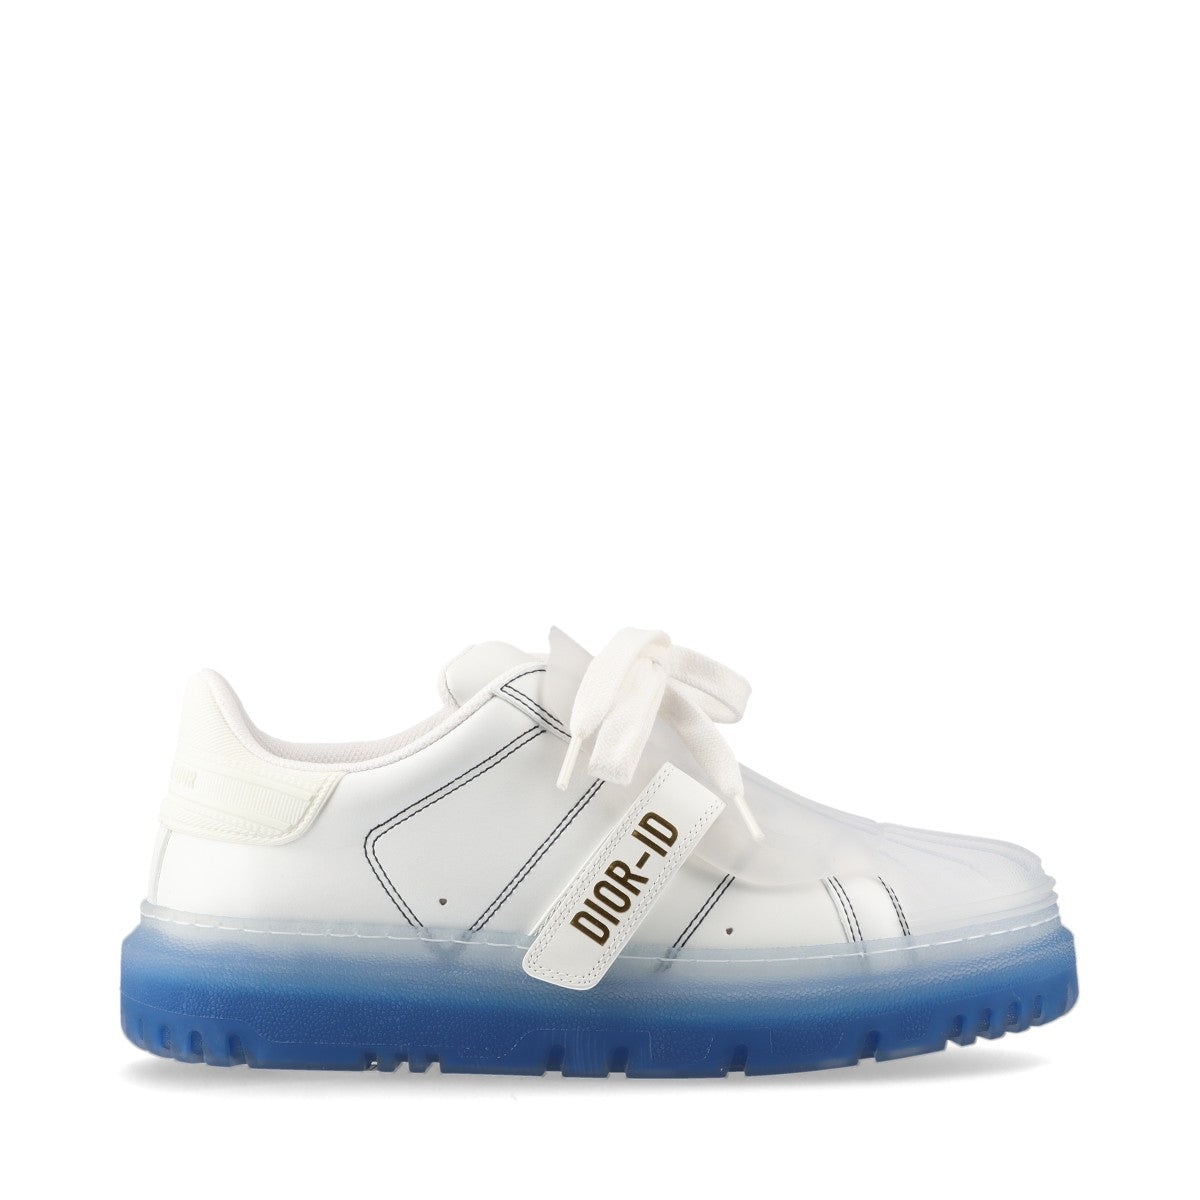 Christian Dior DIOR-ID Leather × Rubber Sneakers 36.5 Ladies' Blue x white Replaceable cord There is a storage bag